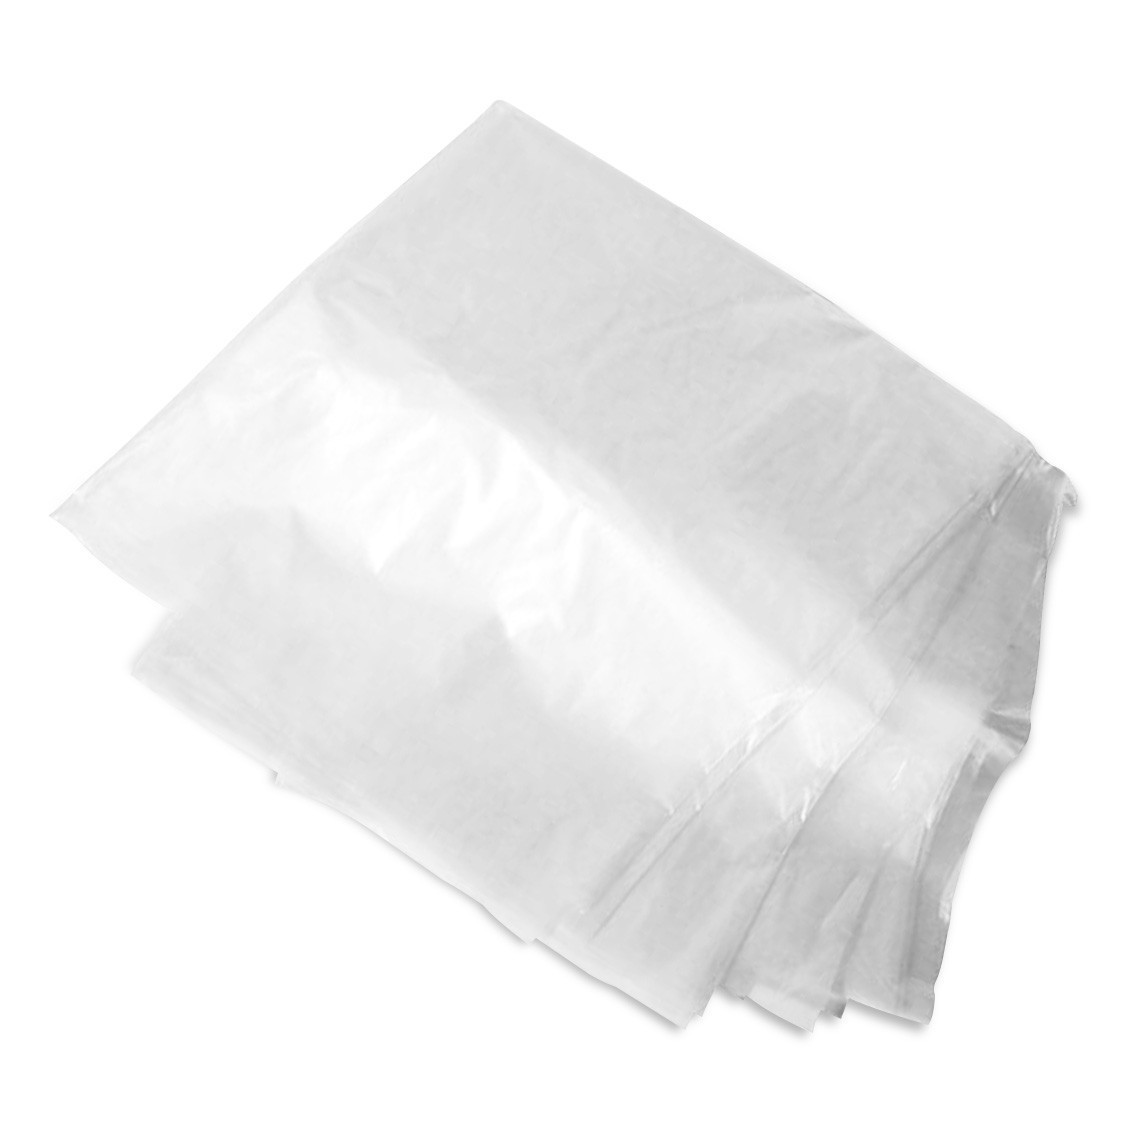 Disposable hand bags for paraffin treatment 100 pcs